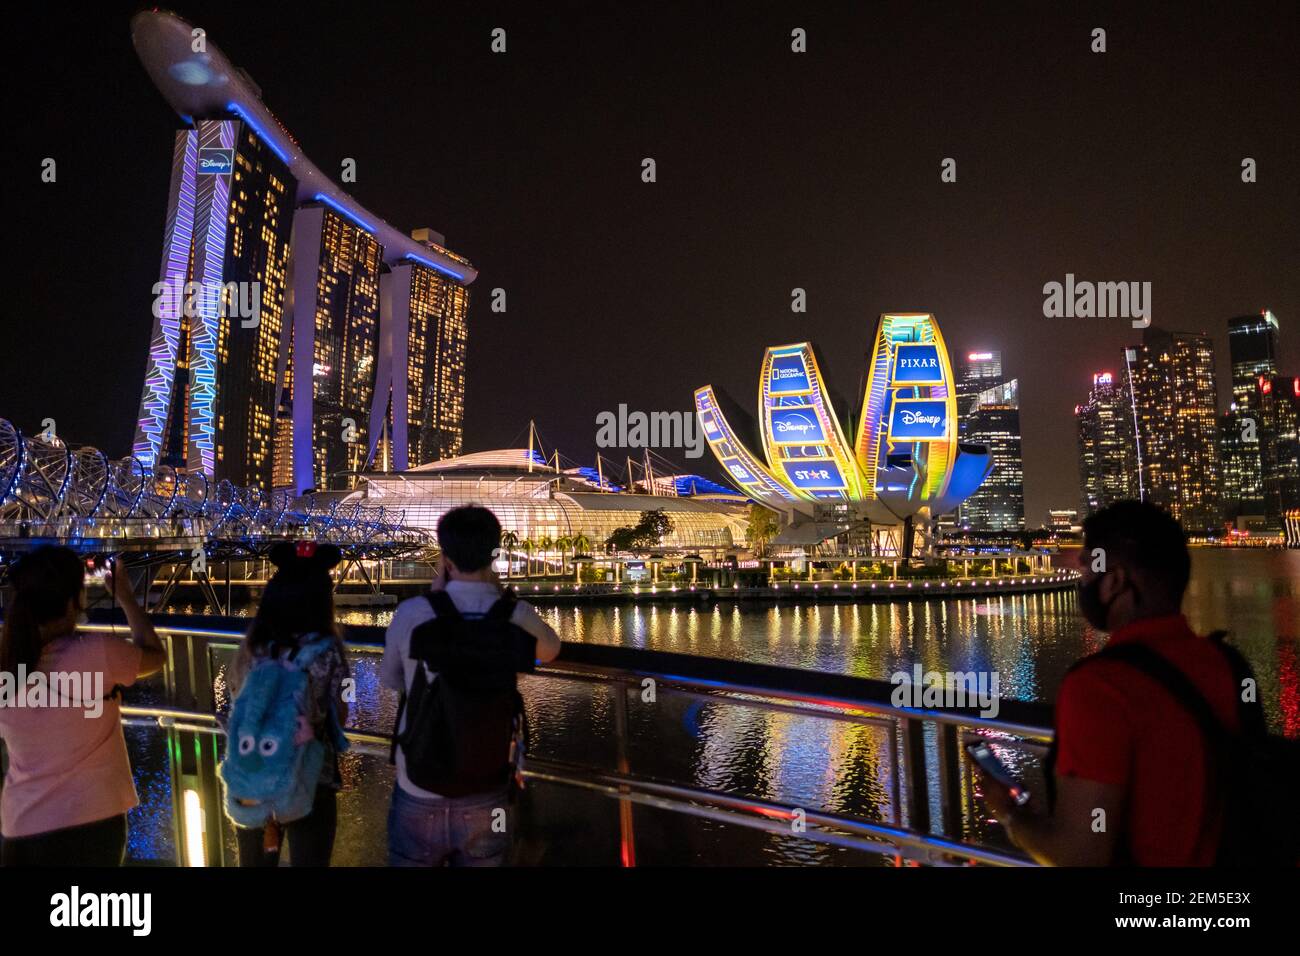 People Are Seen Watching Disney Showcase That Was Projected At The Singapore Art Science Museum And The Marina Bay Sands Singapore Disney Was Launched In Singapore On The 24th February 21 Making The